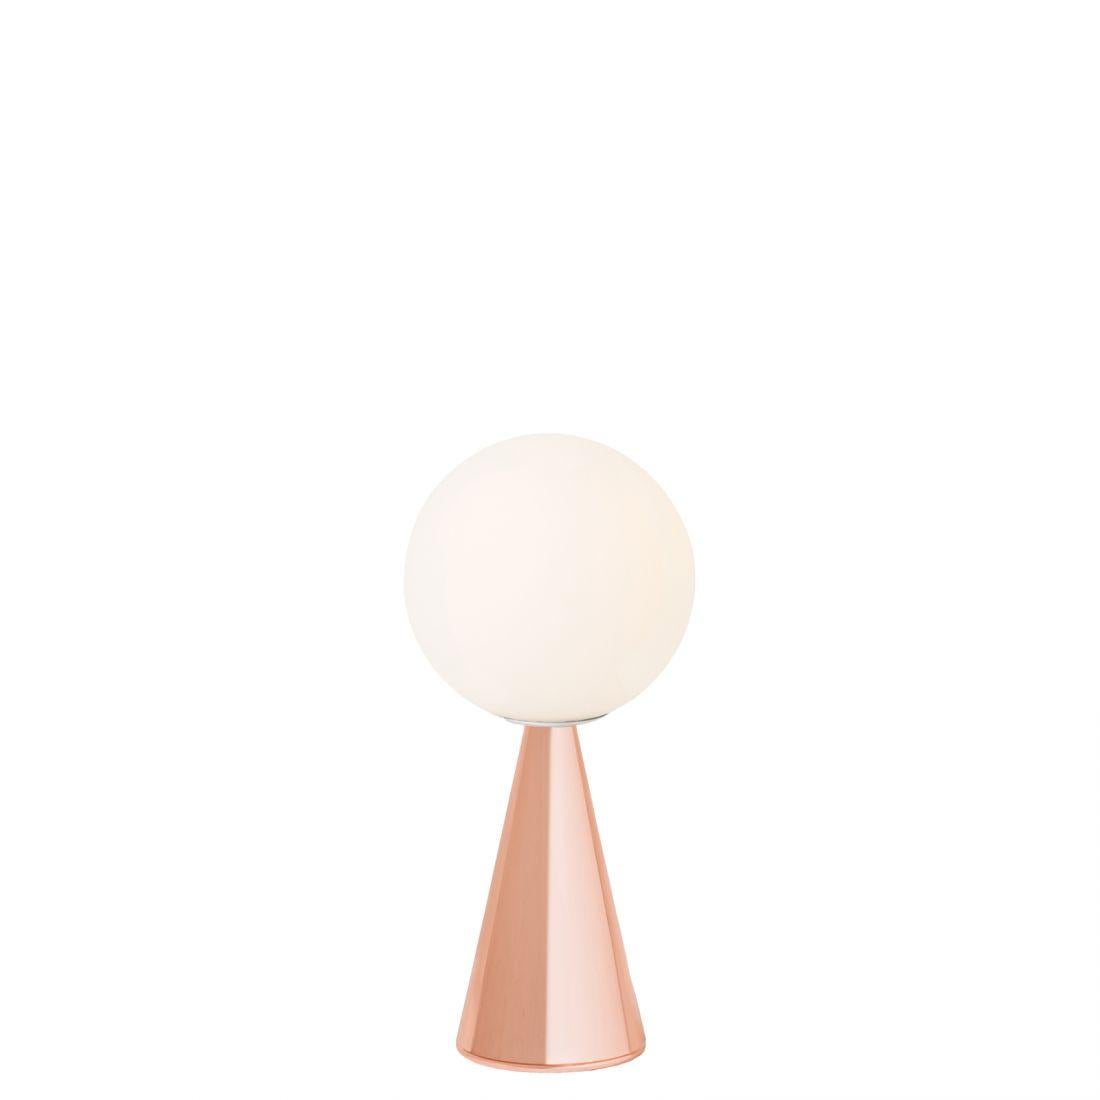 Gio Ponti 'Bilia' table lamp in pink for Fontana Arte. Executed in a pink painted metal frame with a blown white glass diffuser, transparent cord with dimmer and plug. One of the first and most iconic designs for what would become Fontana Arte. The